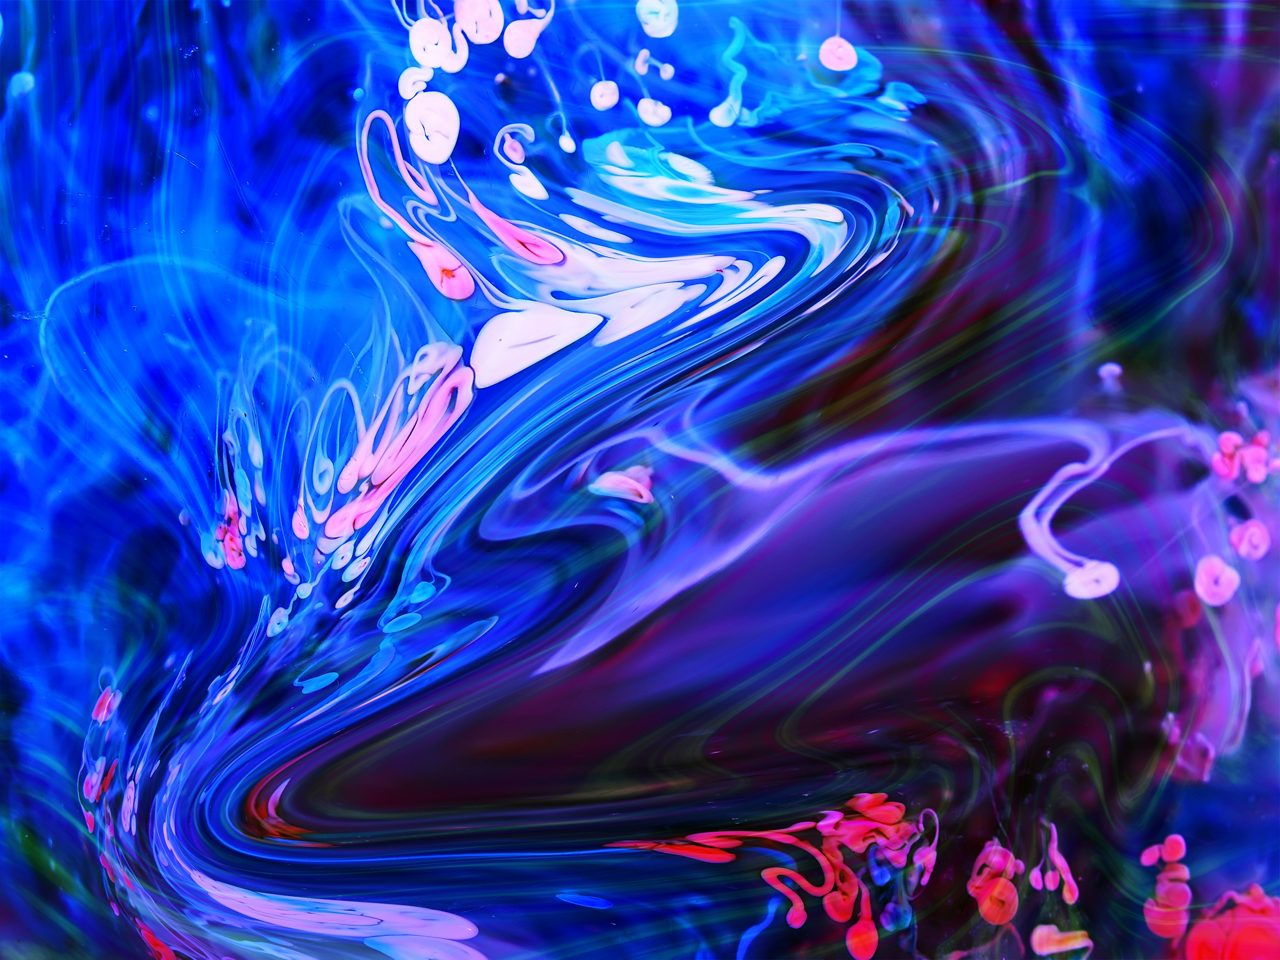 Swirled blue, pink and purple paint